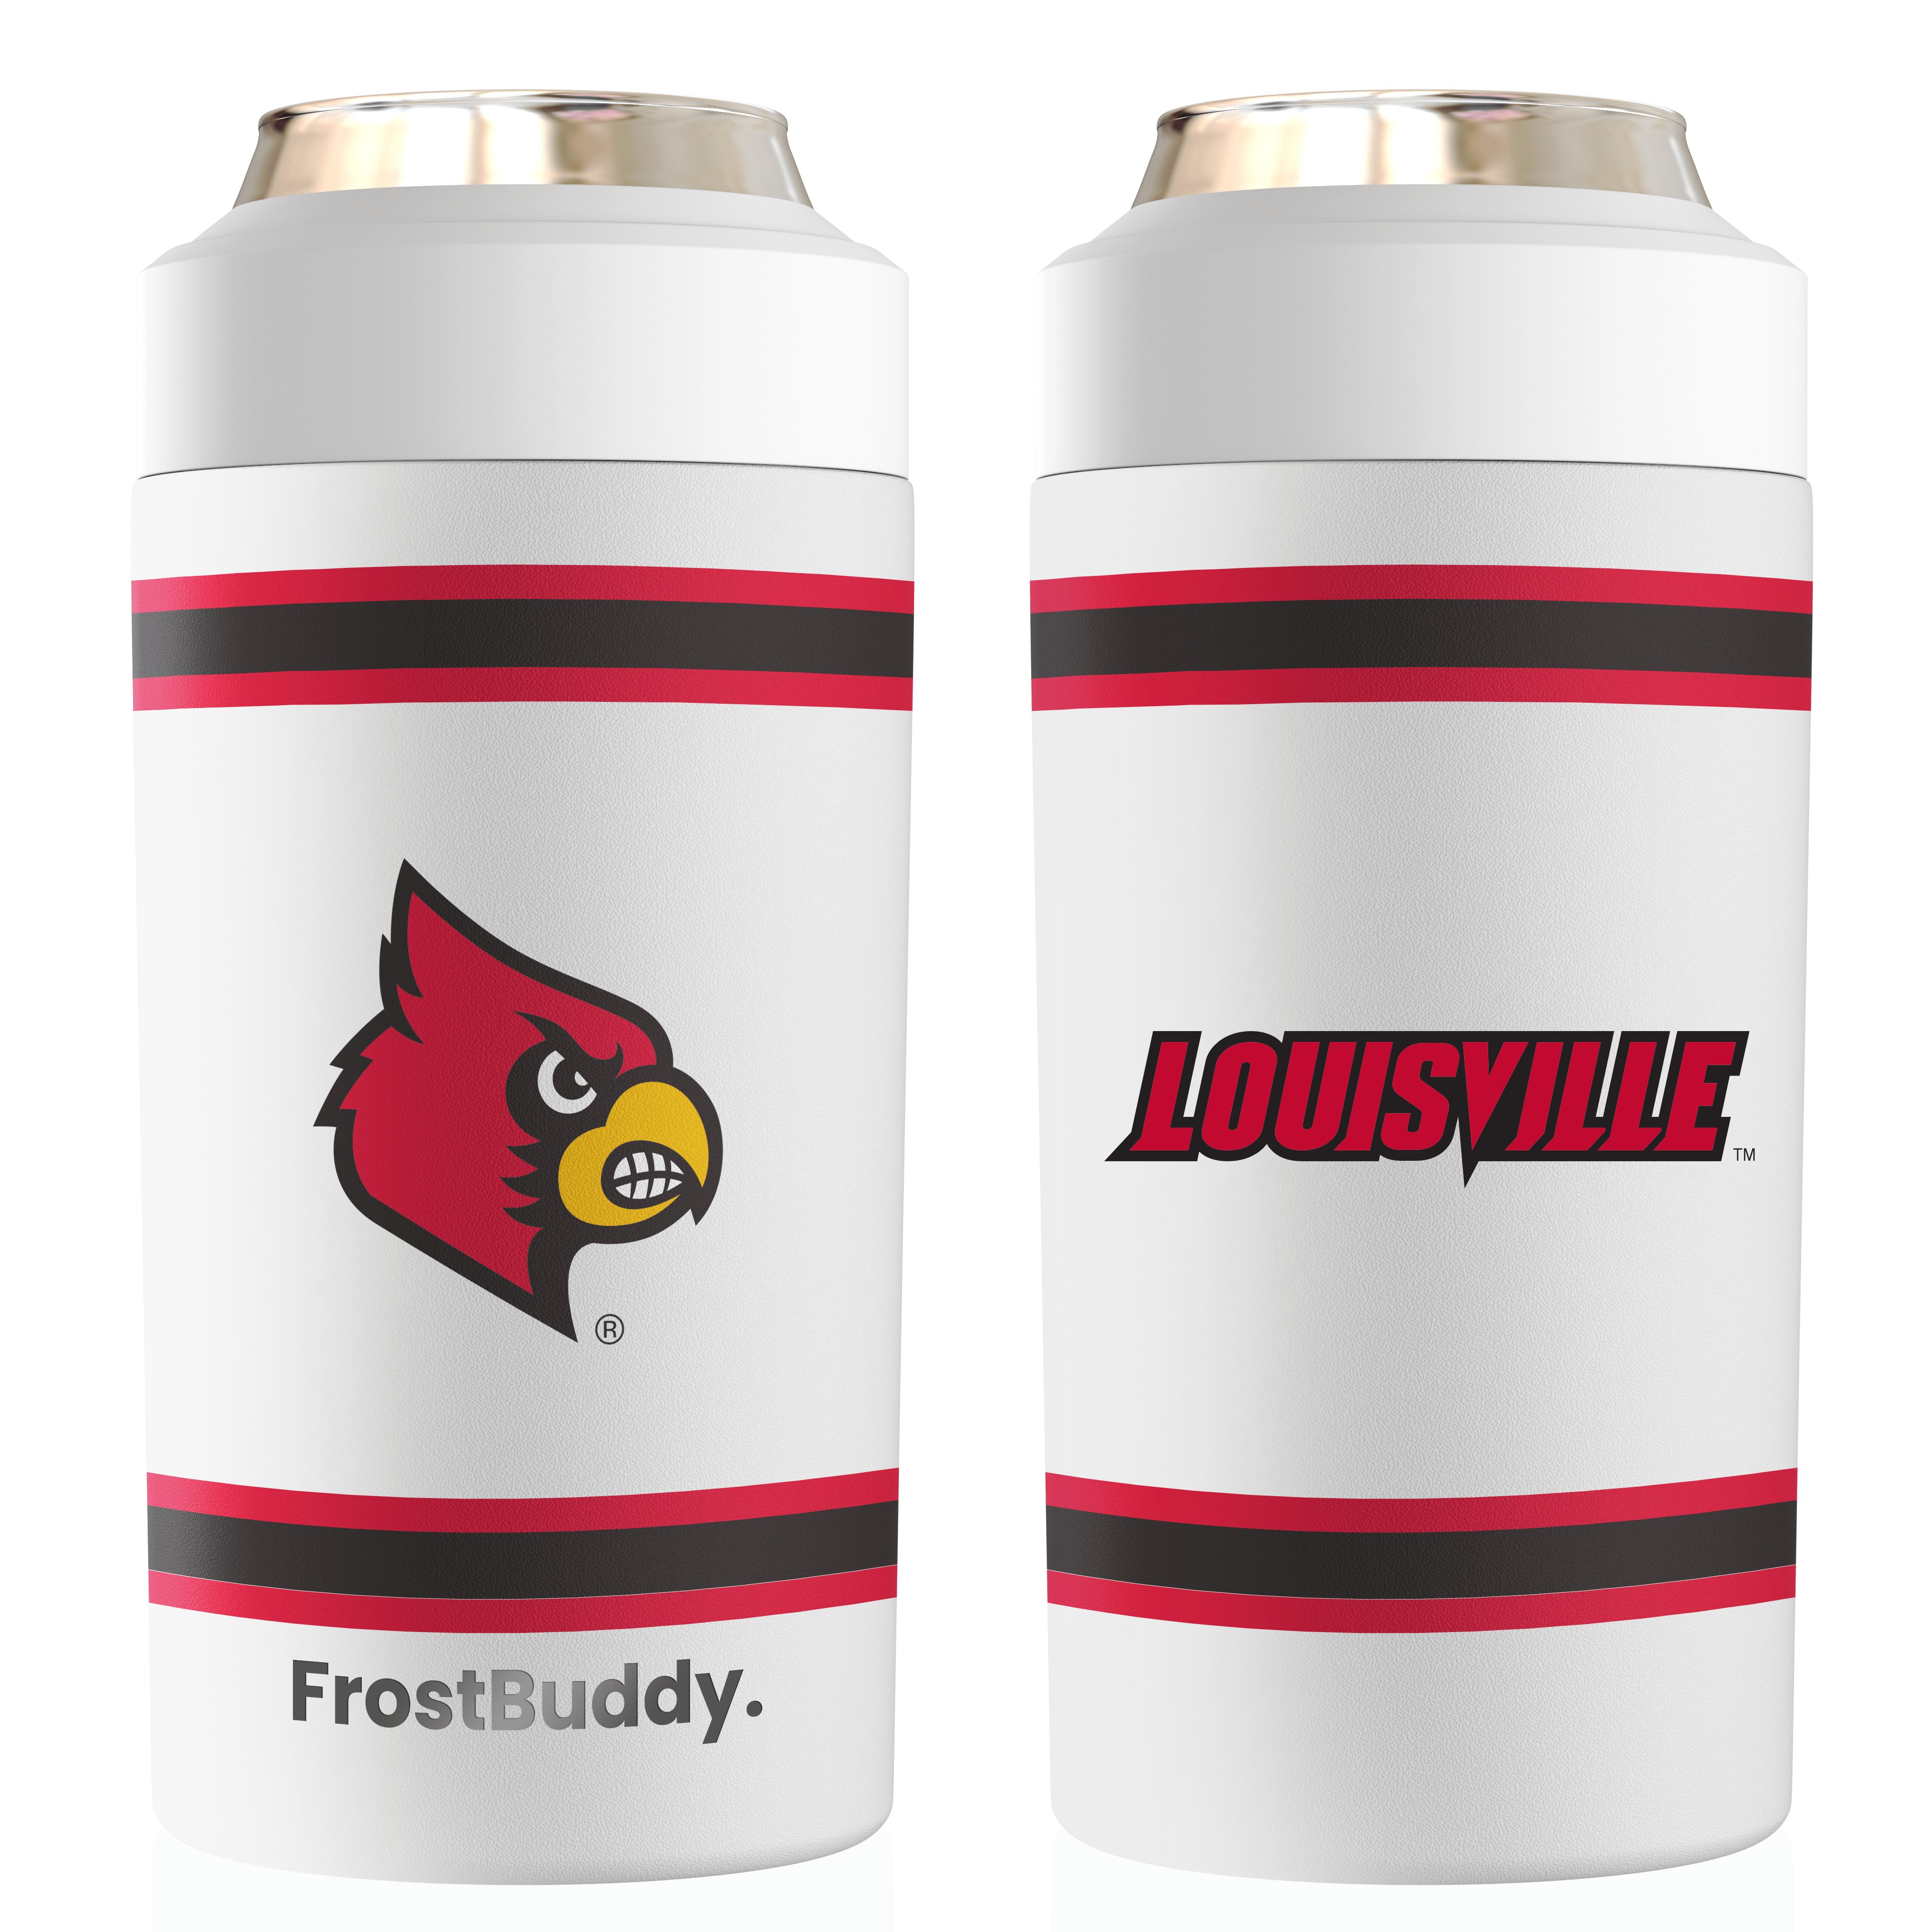 Universal Frost Buddy Koozies 🍻 fit 8oz,12oz,16oz and bottles ALL